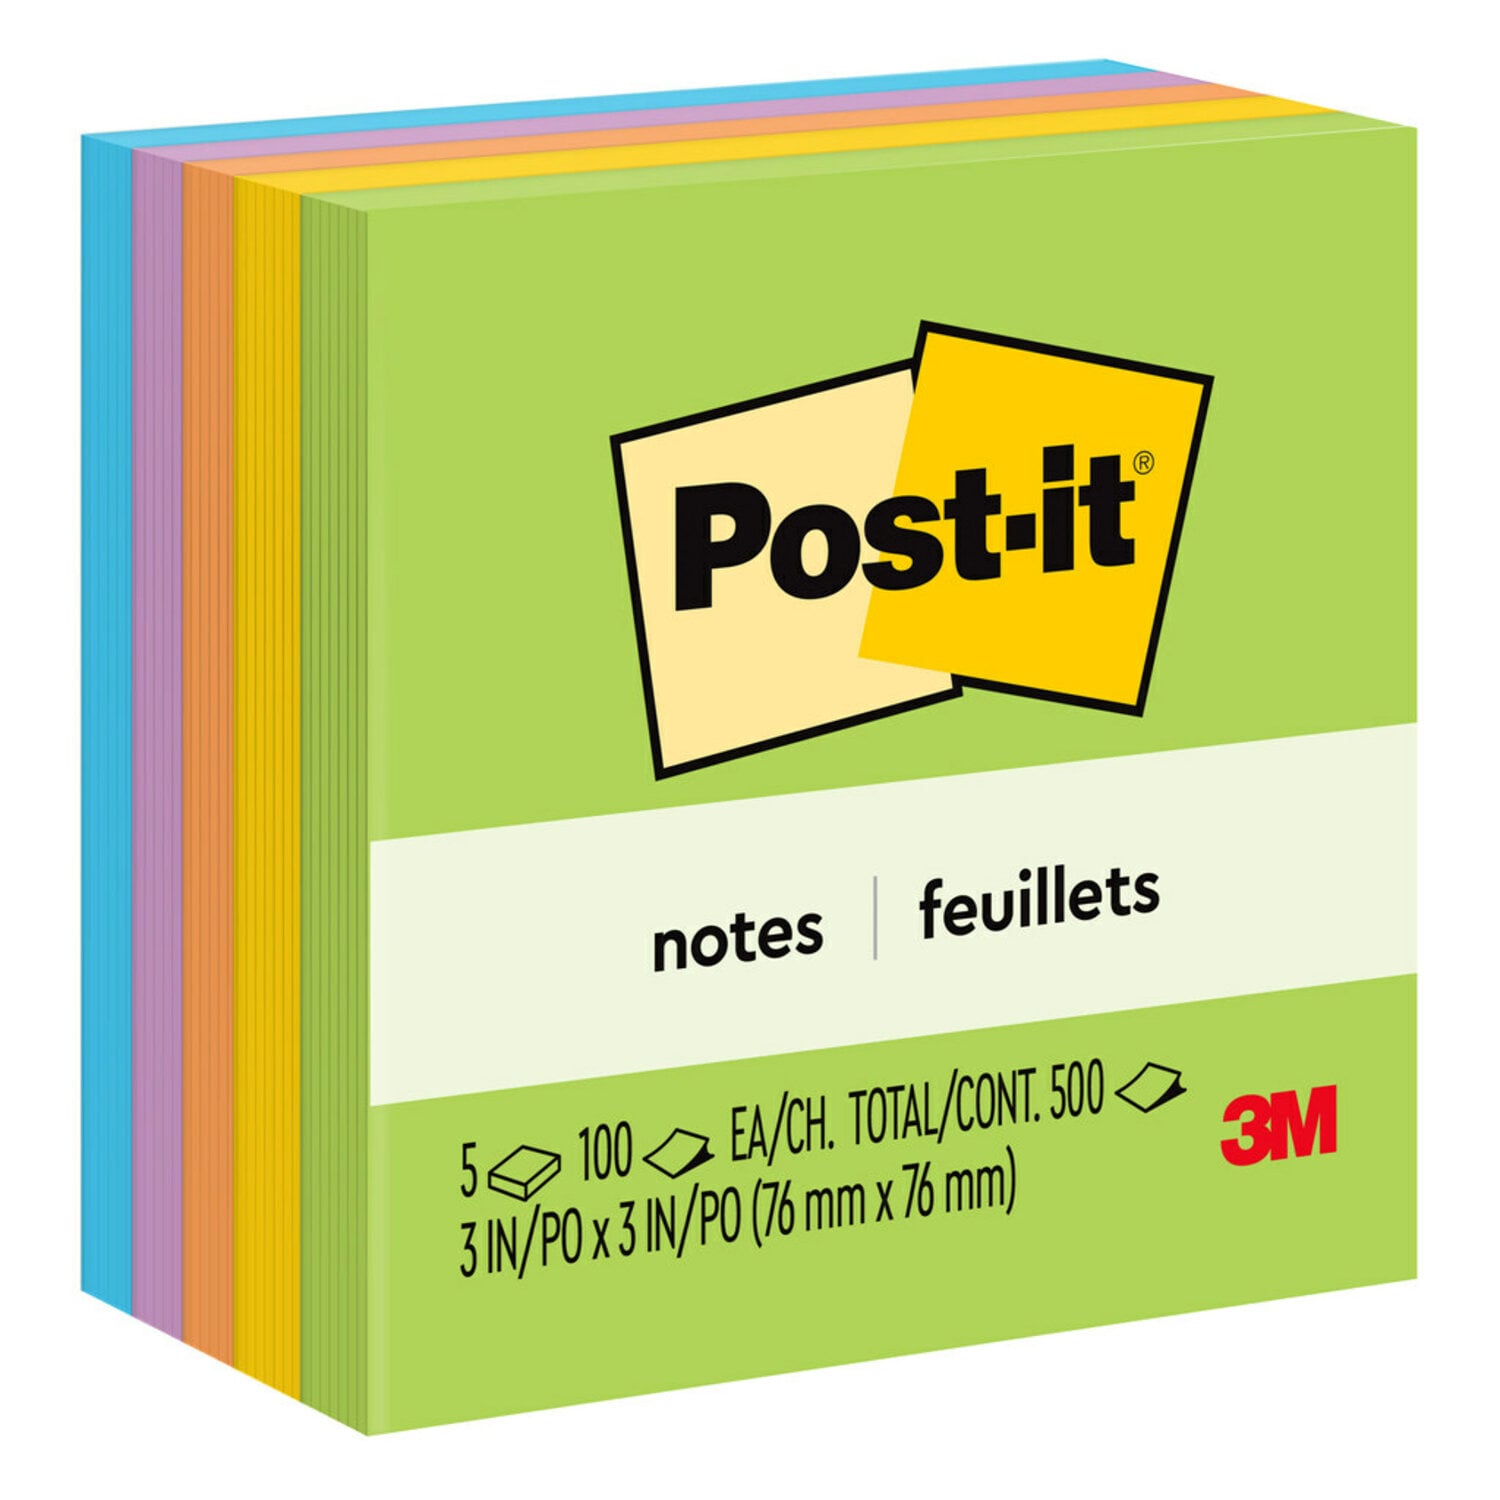 7100144883 - Post-it Notes, 654-5UC, 3 in x 3 in (76 mm x 76 mm), Jaipur colors, 5
Pads/Pack, 10 Sheets/Pad